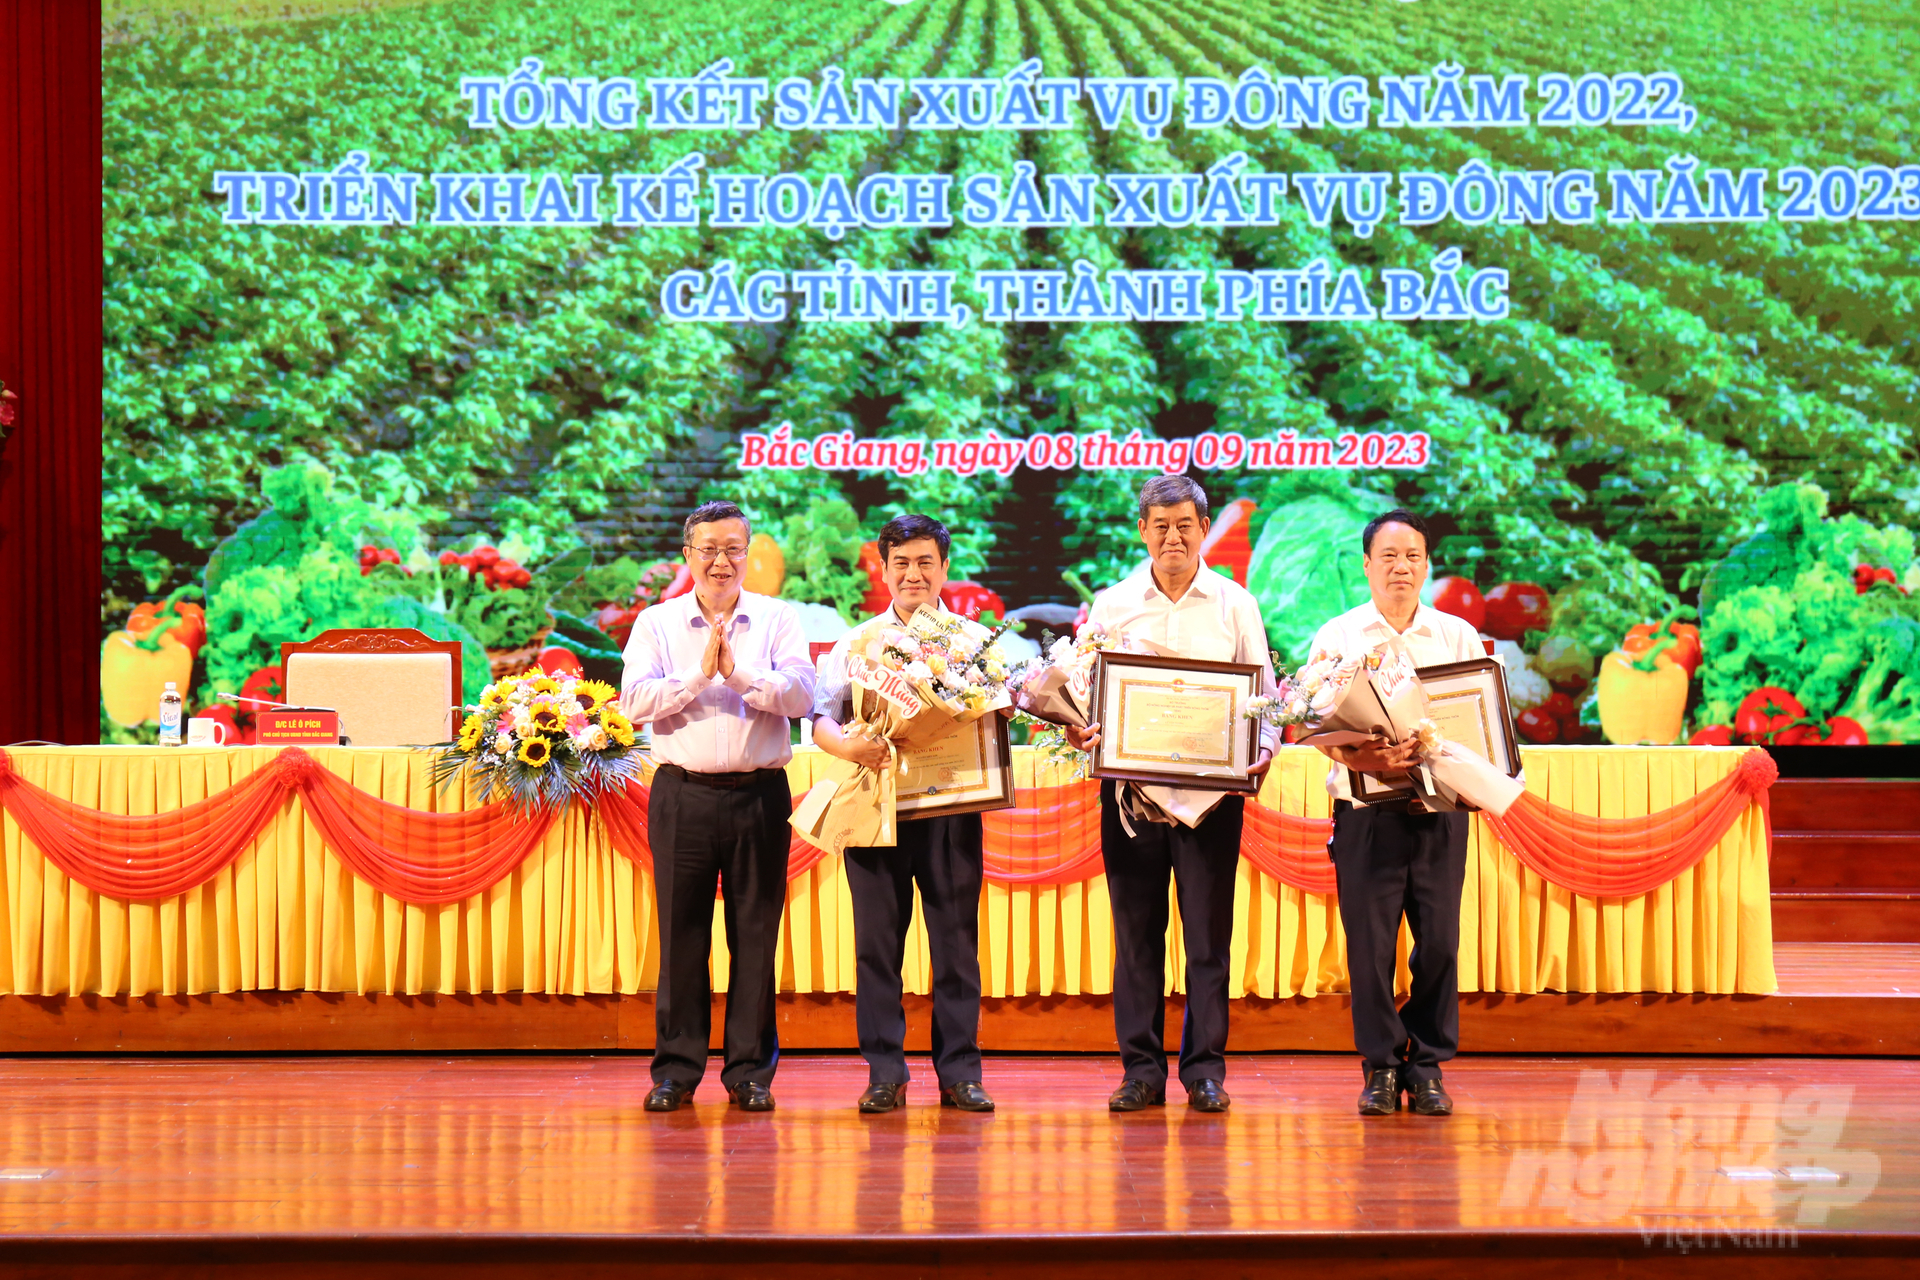 Deputy Minister Hoang Trung awarded certificates of merit from the Minister of Agriculture and Rural Development to 3 individuals who have made outstanding achievements in directing crop production in 2021-2022. Photo: Trung Quan.